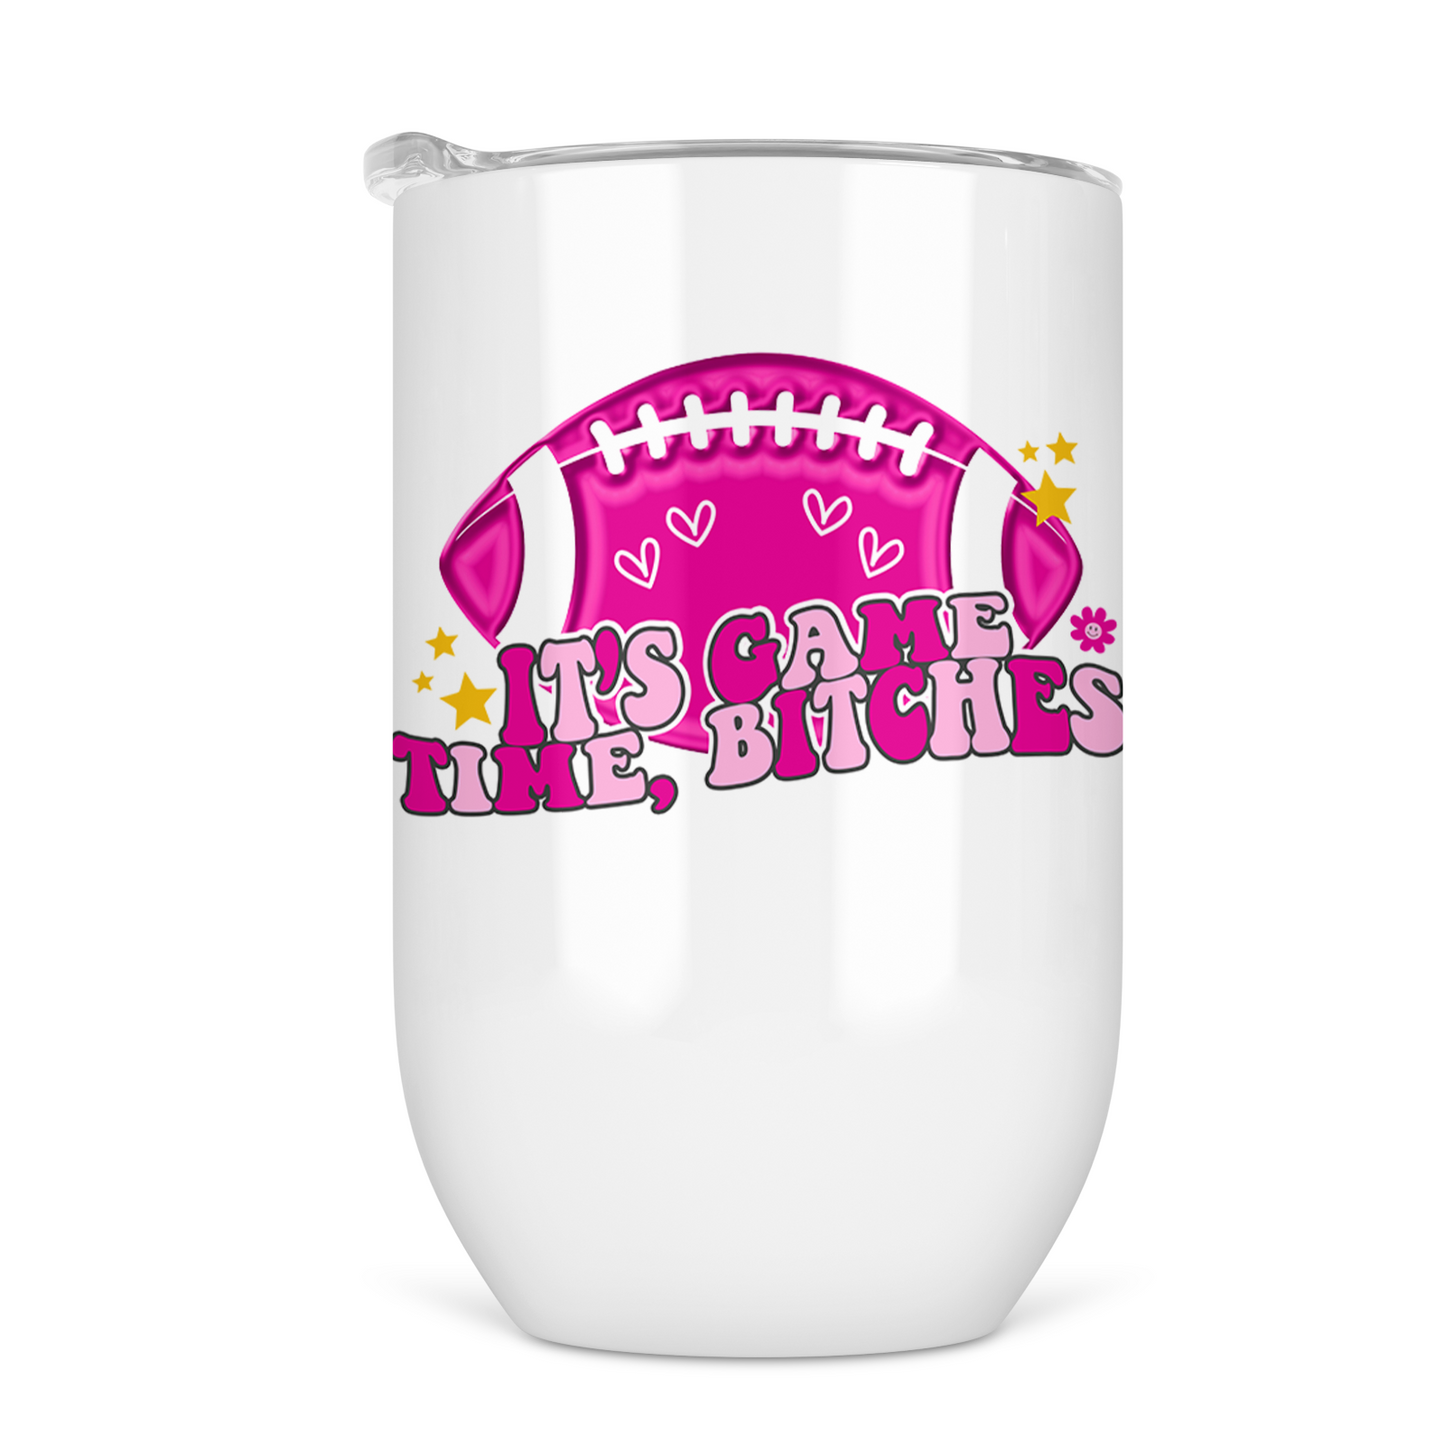 It's Game Time, Bitches 12 Oz Wine Tumbler